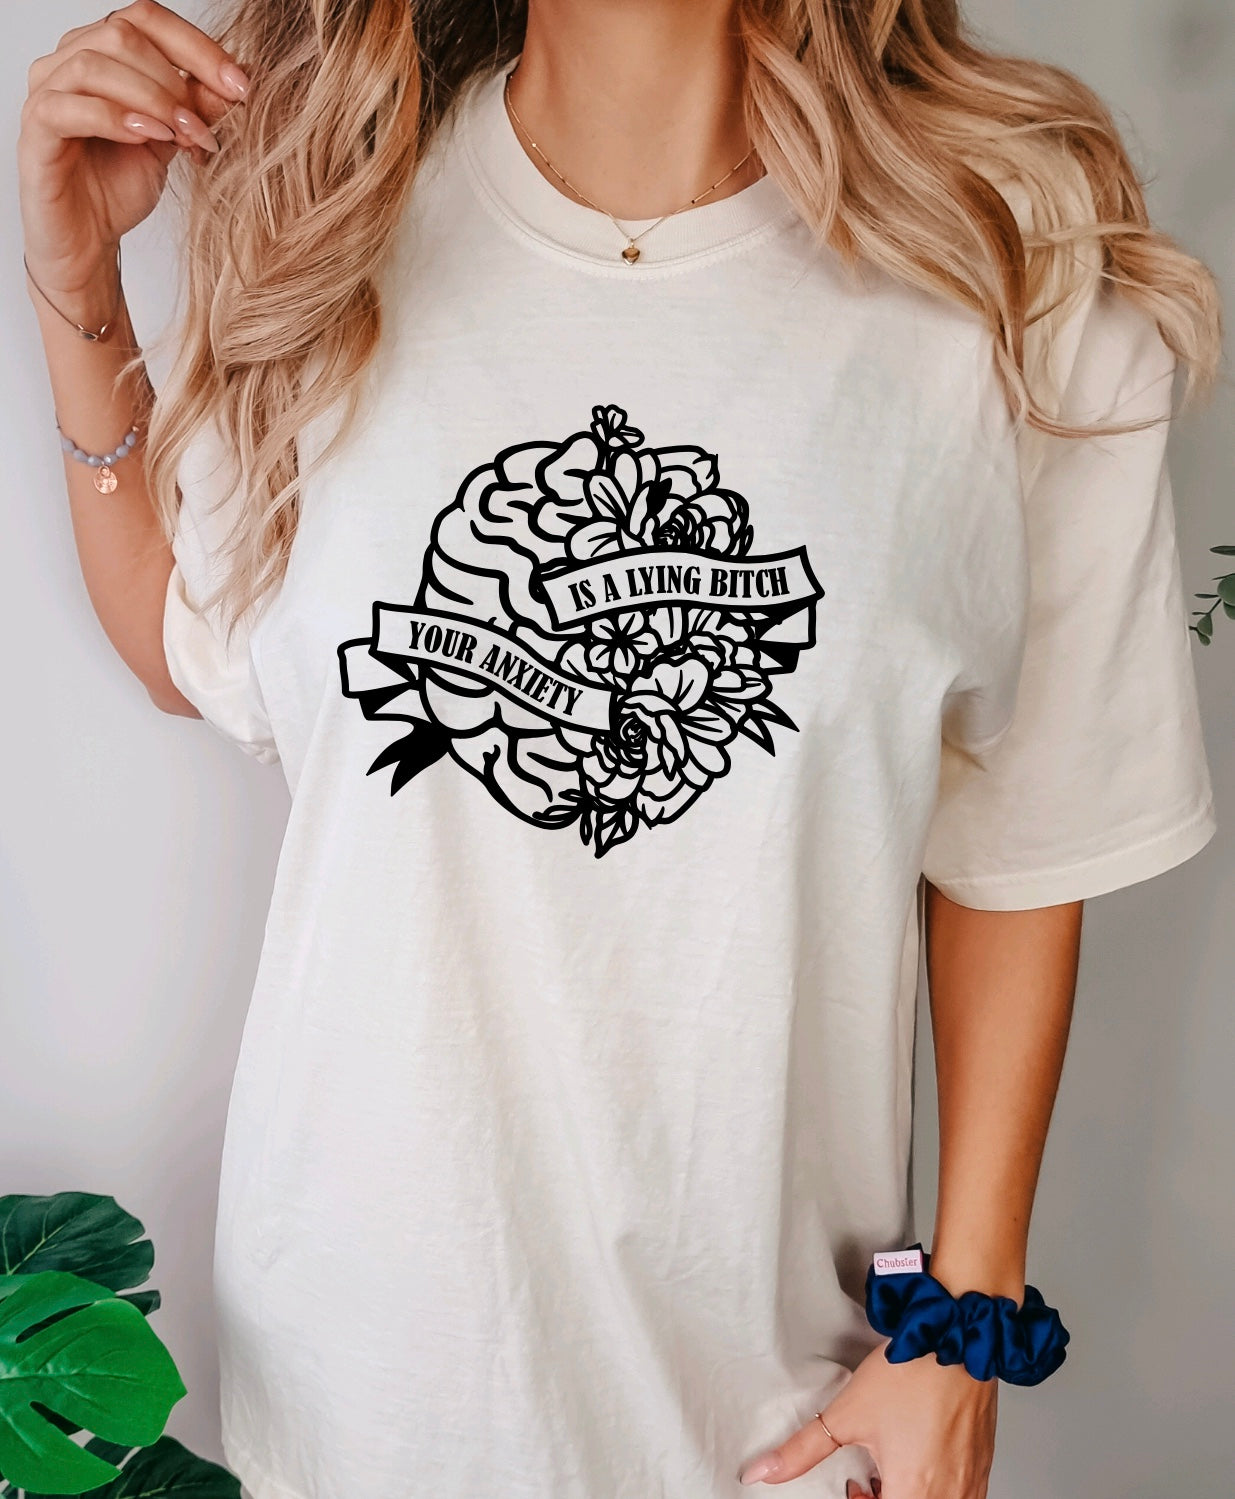 Your anxiety is a lying bitch comfort colors t-shirt with floral brain design in ivory